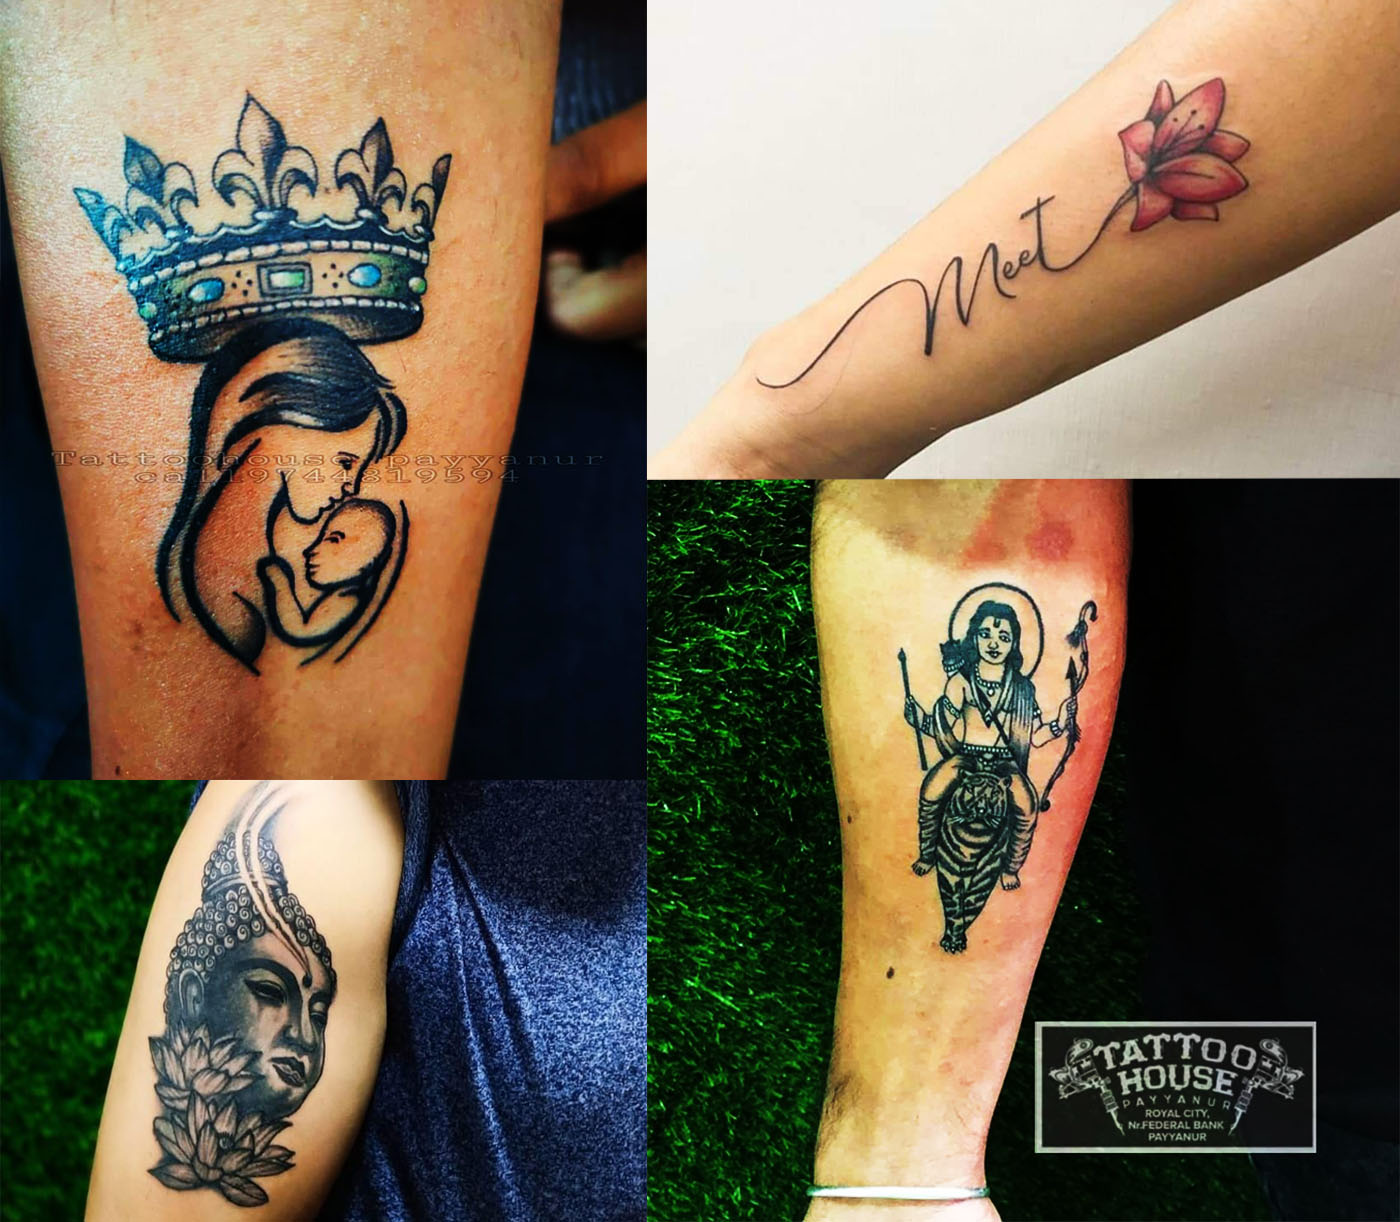 Tattoo designs for boys and girls color and black and white